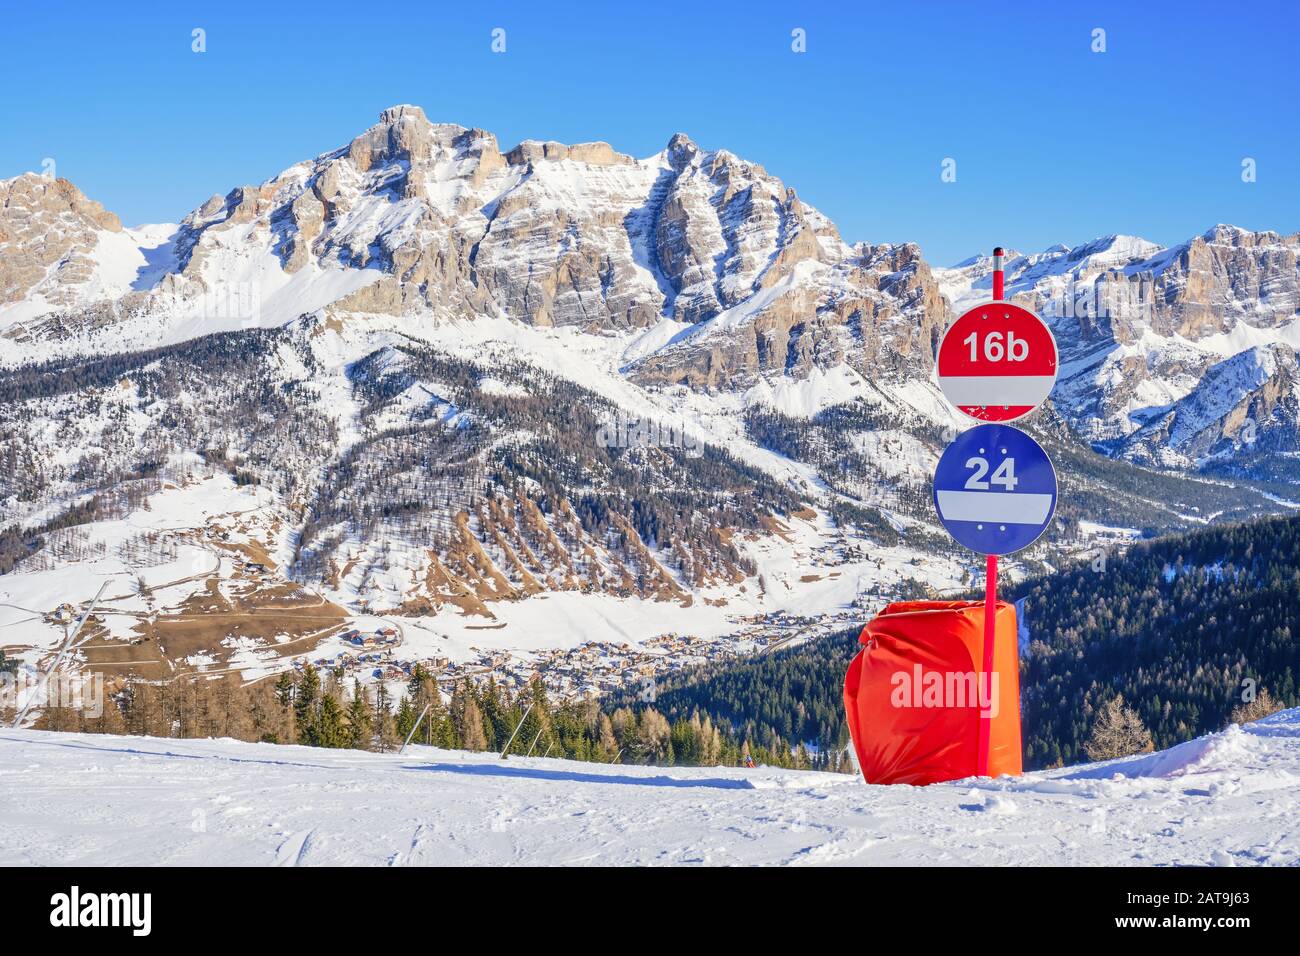 Winter view of Piz dles Cunturines (Cima Cunturines) from a ski slope in Alta Badia, South Tyrol, Dolomiti mountains, Italy, with piste signs for red Stock Photo